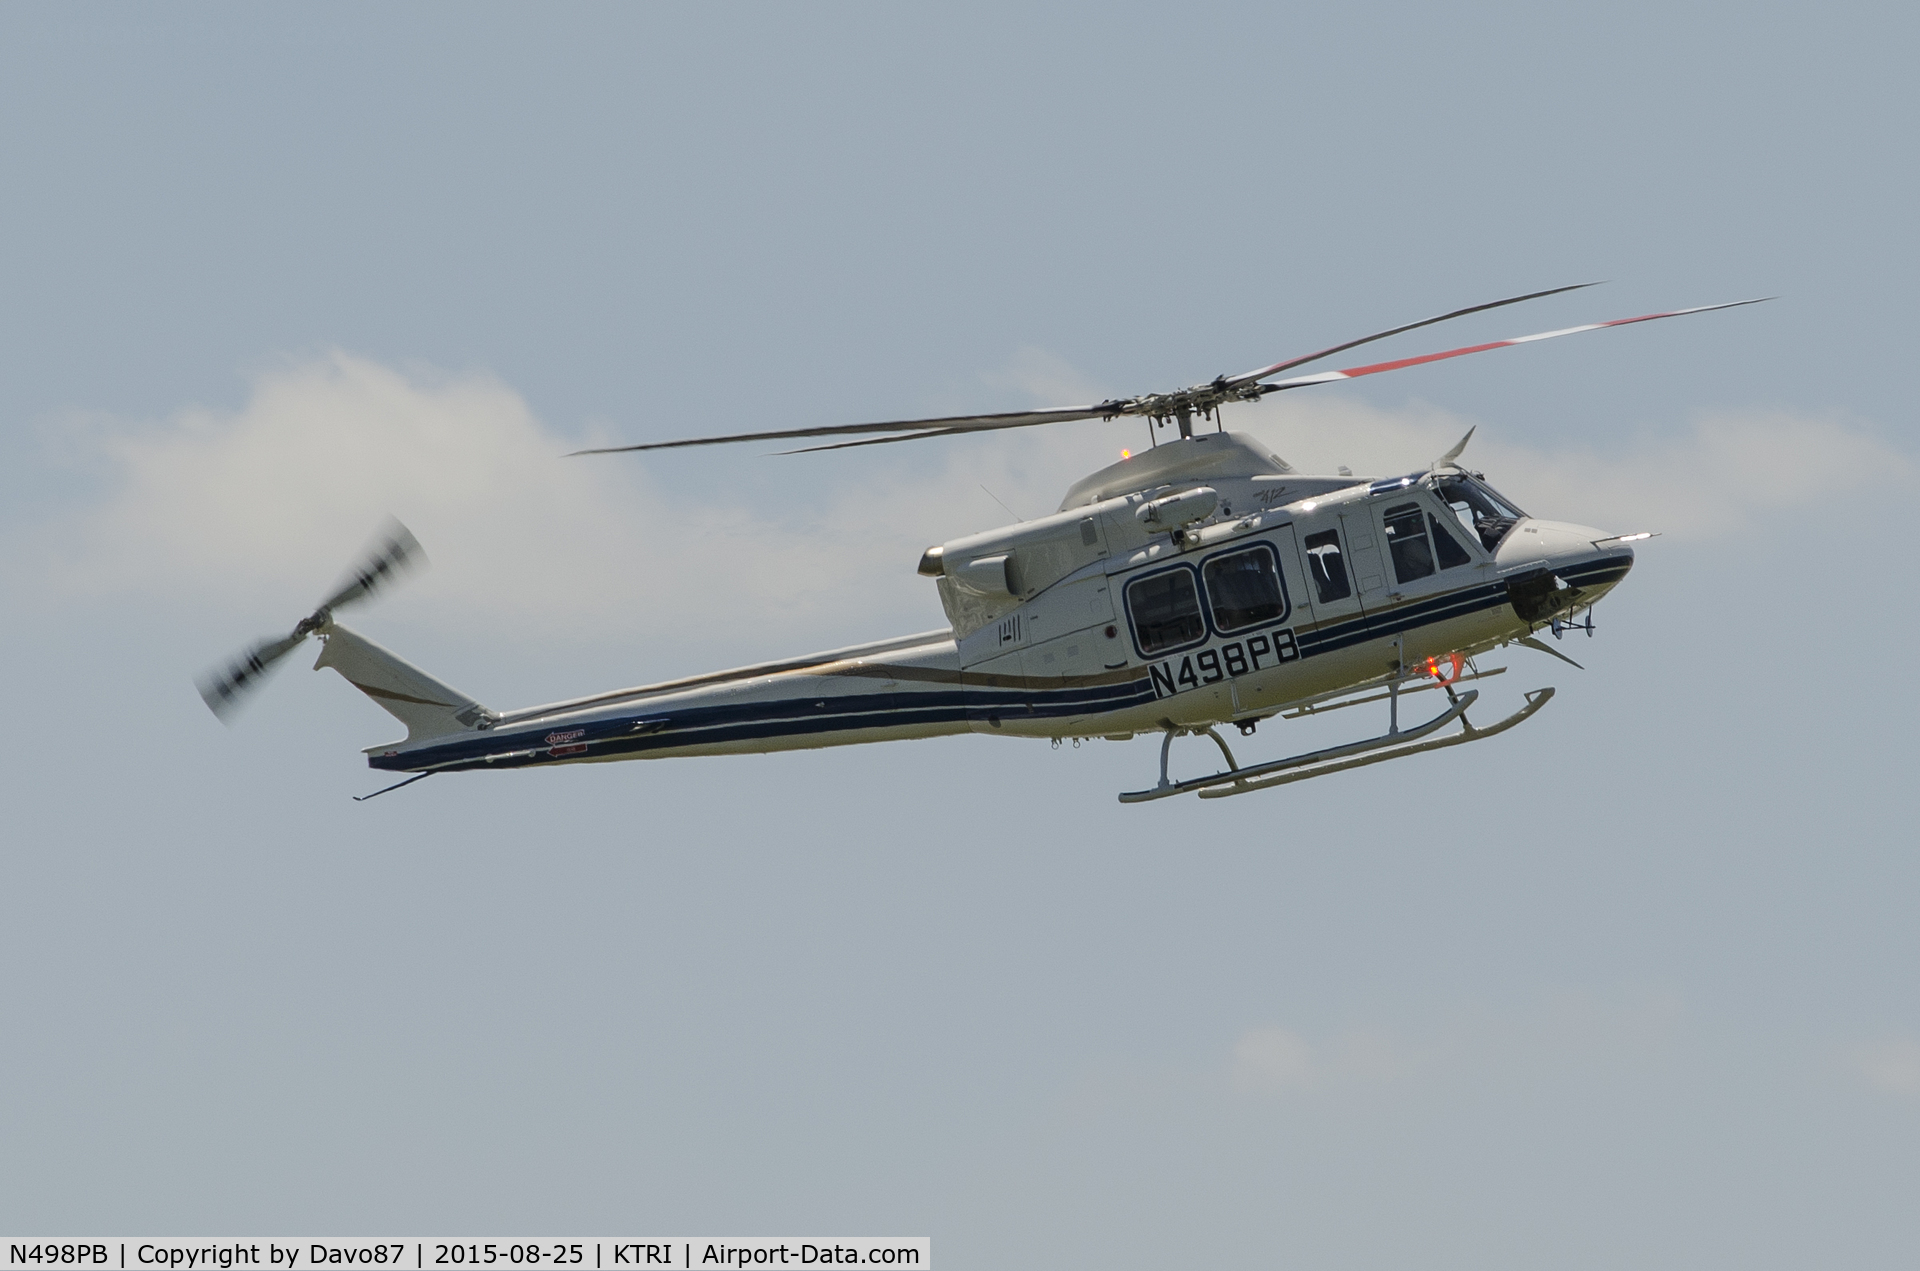 N498PB, 2013 Bell 412EP C/N 36649, Coming in to land at Tri-Cities Airport (KTRI) on August 25th, 2015. Pilots performed multiple spins (left and right) while hovering less than ten feet above the tarmac.